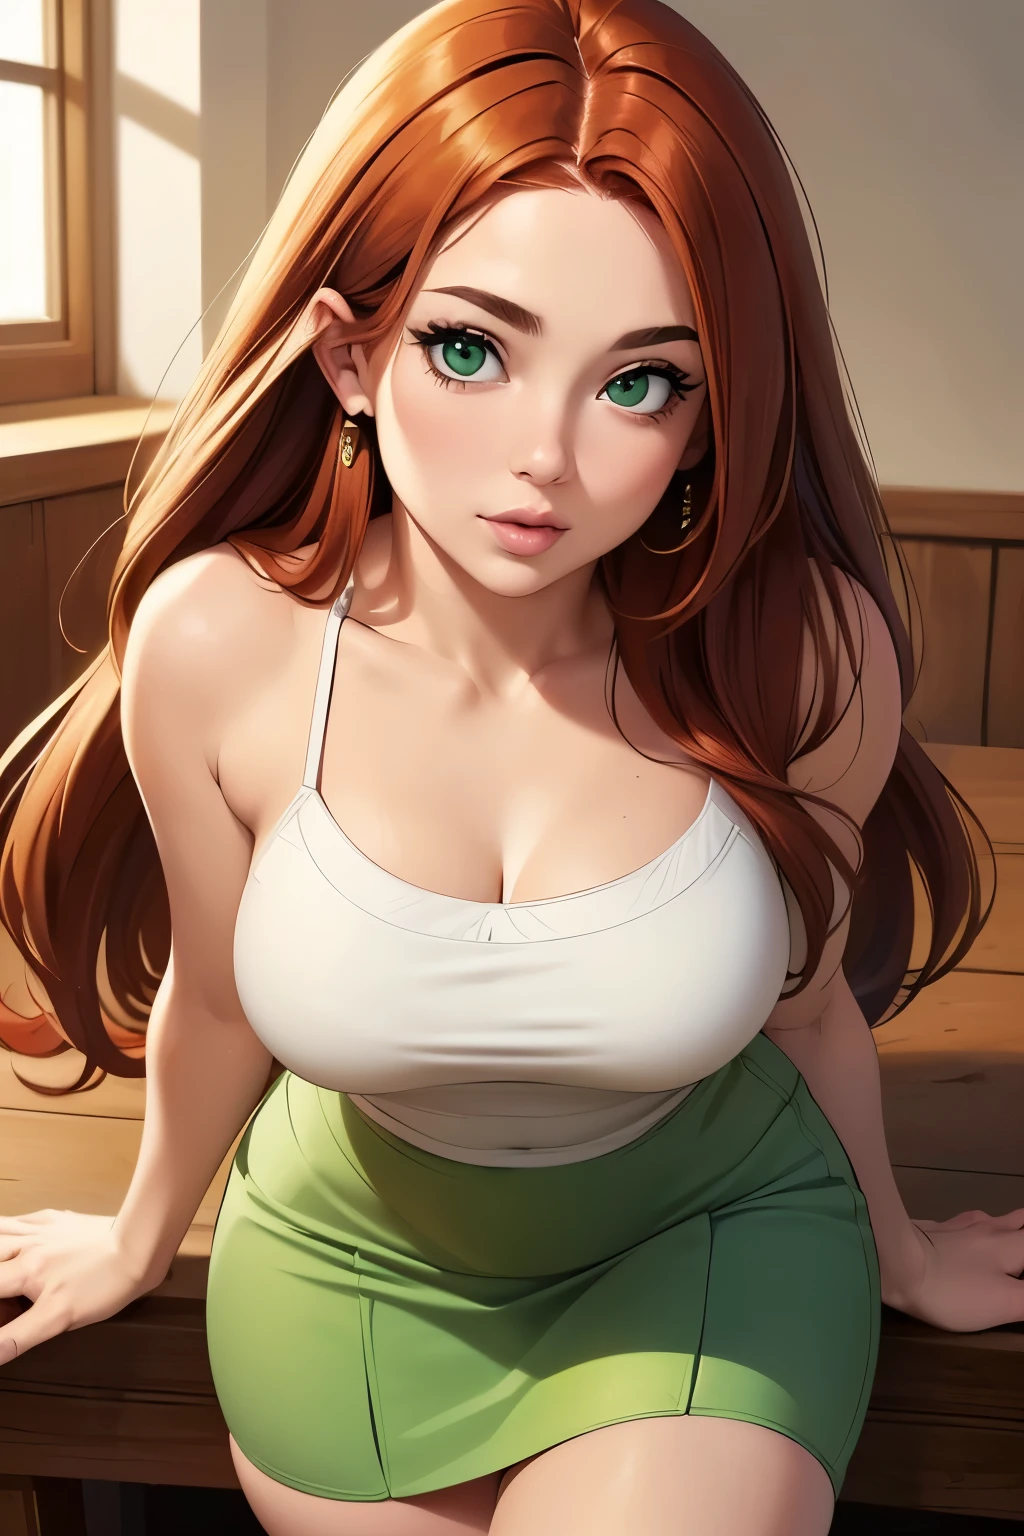 ((Solo)) ((Masterpiece)) ((High Quality)) ((Perfect Face)) ((Beautiful)) ((Round face)) ((Middle aged)) ((Auburn hair)) ((Long Hair)) ((Cute Nose)) ((Green Eyes)) ((Light Skin)) ((Camisole)) ((tight skirt)) ((Full lips)) Curvy figure 